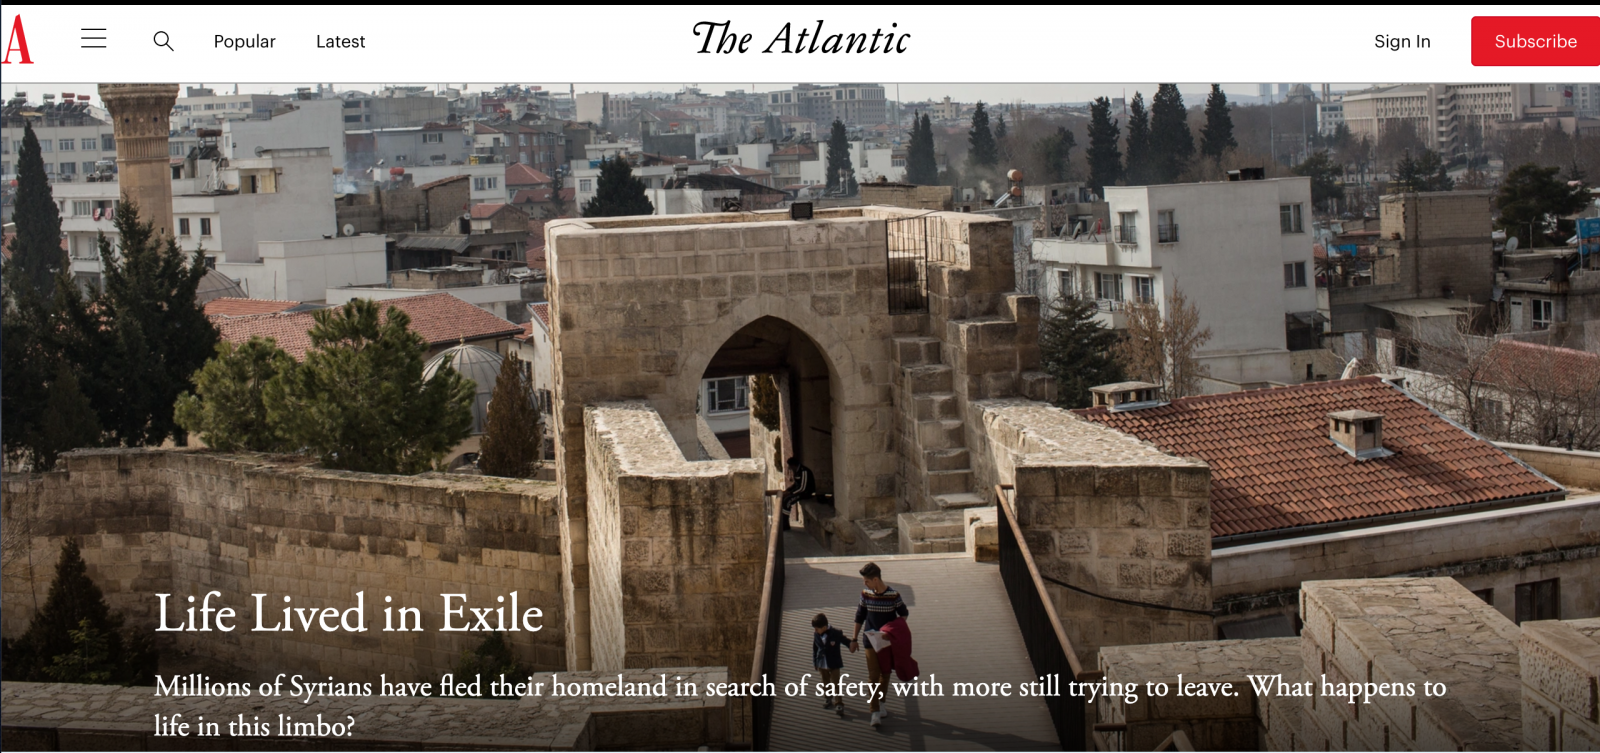 The Atlantic - Life Lived in Exile